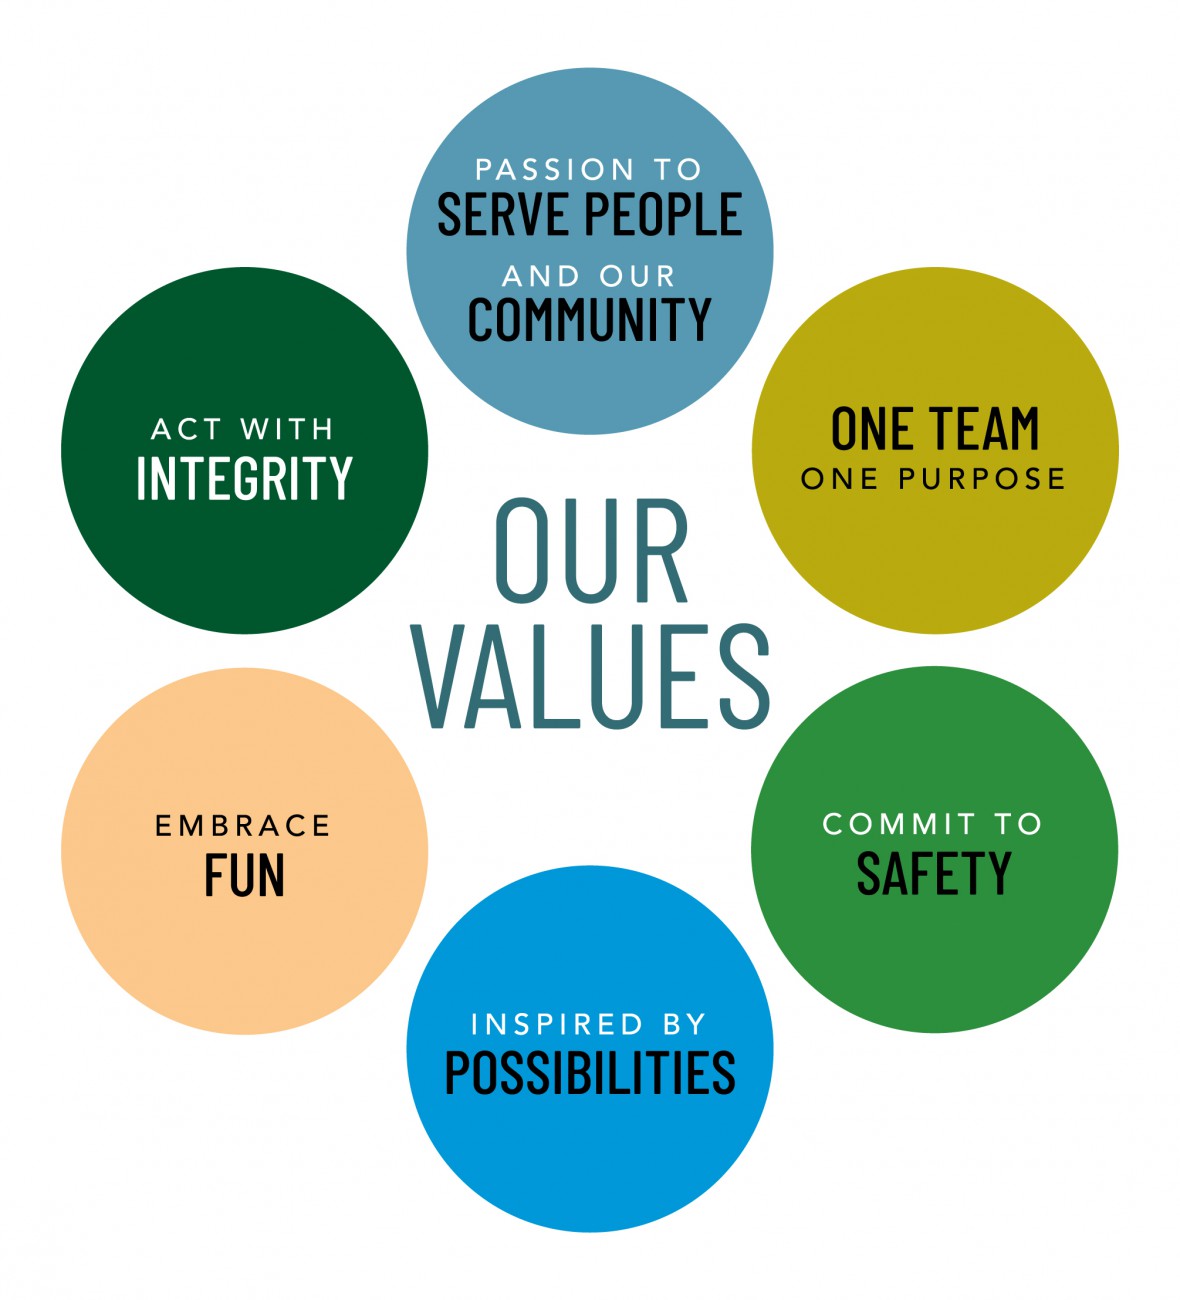 Central 'Our Values' text surrounded by six circles, clockwise: 'Serve people and community', 'One team, one purpose', 'Commit to safety', 'Inspired by possibilities', 'Embrace fun', and 'Act with integrity'.